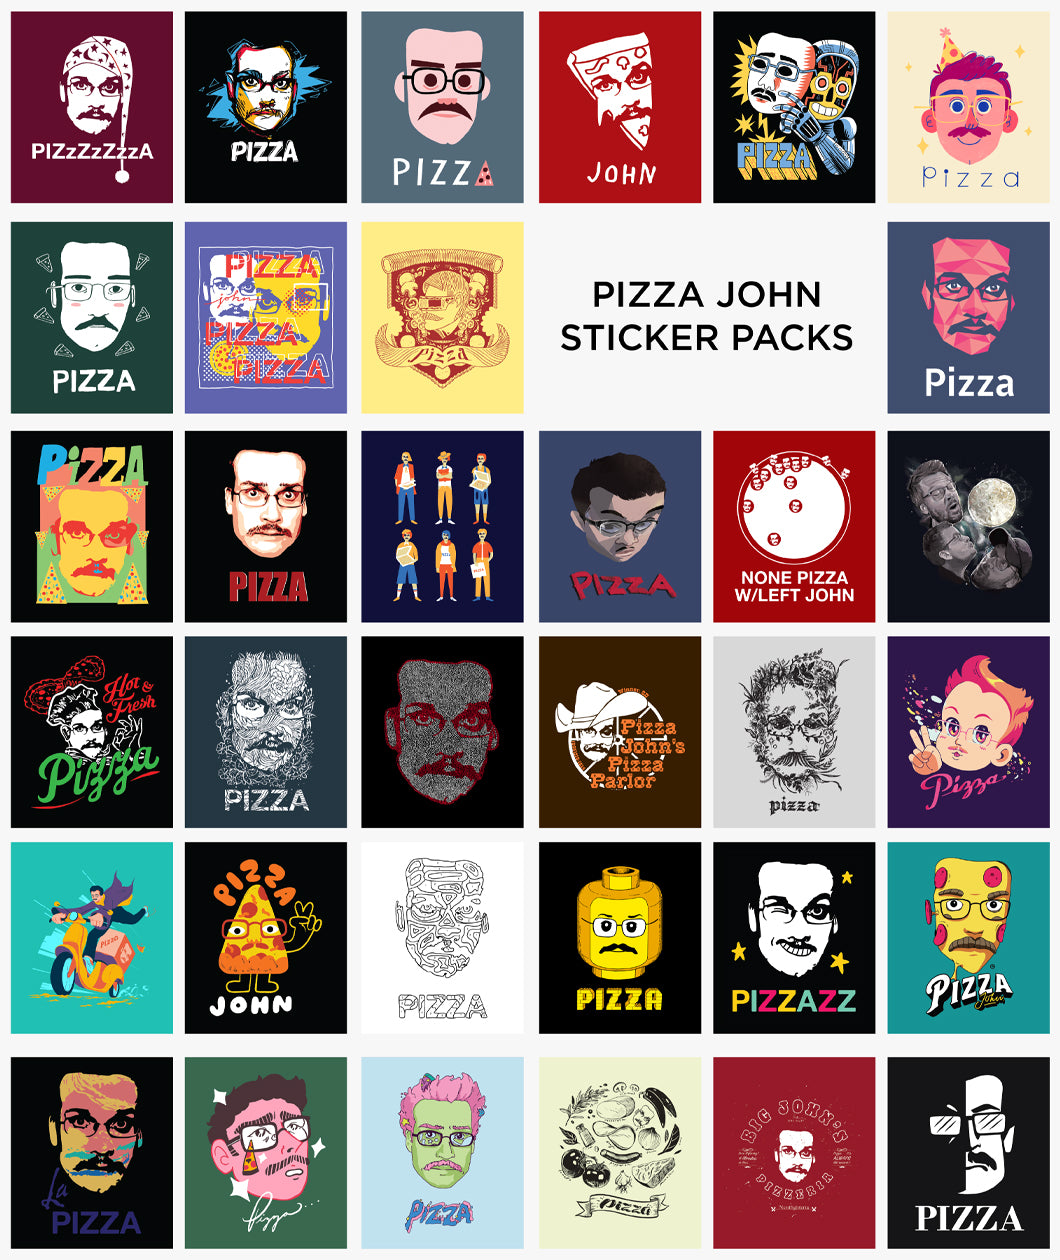 A collection of thirty-four different Pizza John designs from past years with "PIZZA John Sticker Pakcs" written in black on the second row - from Vlogbrothers